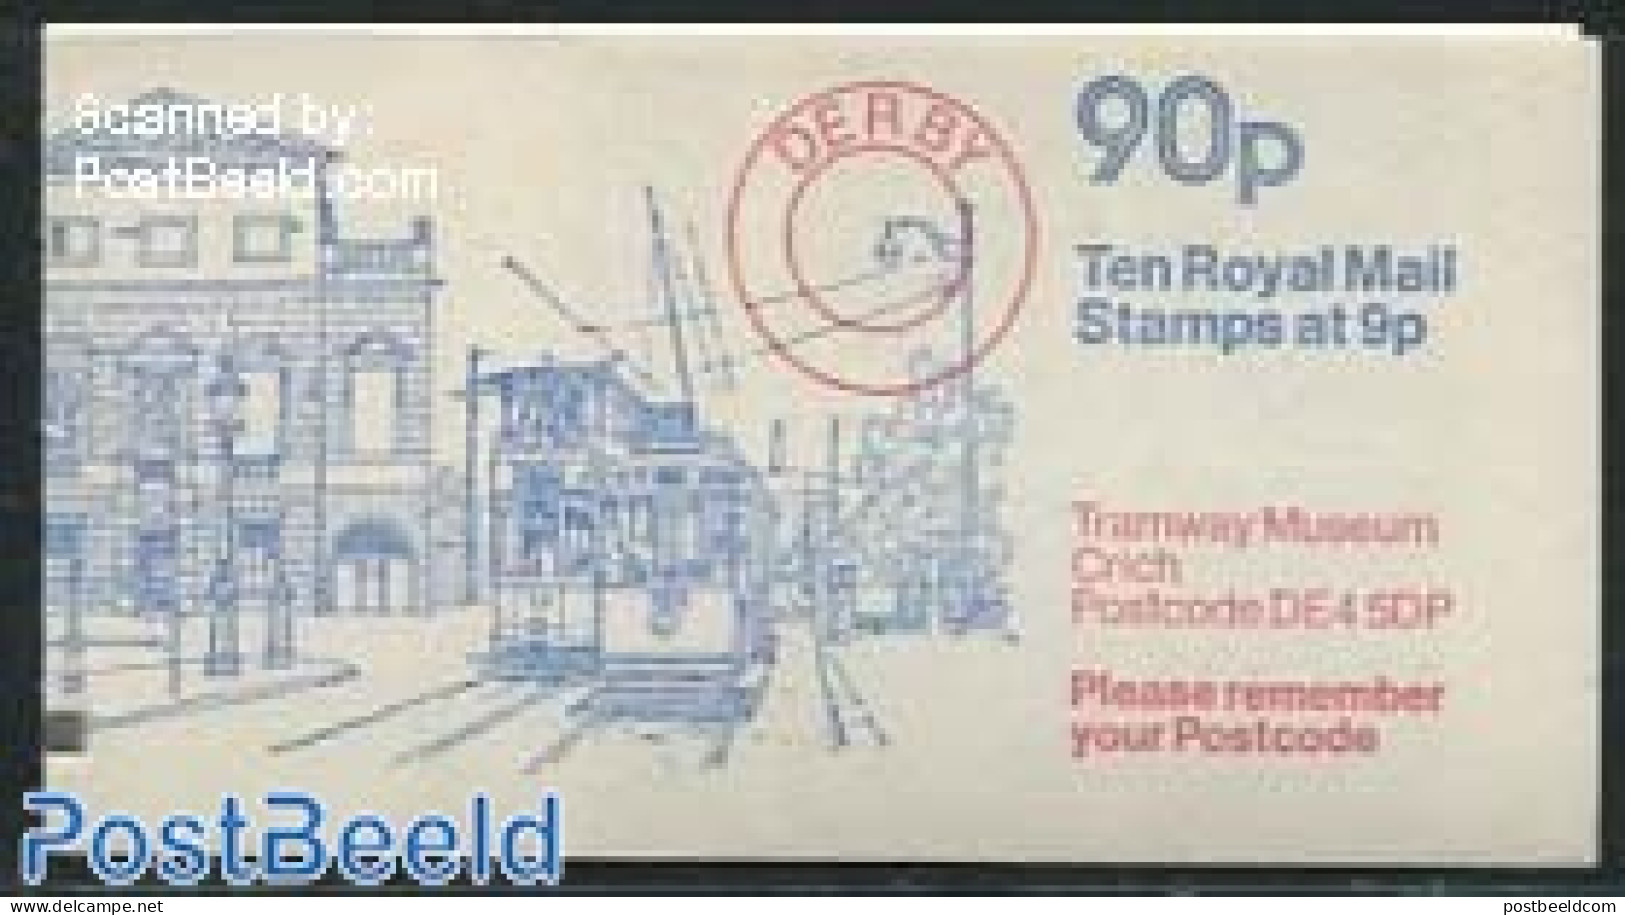 Great Britain 1979 Definitives Booklet, Tramway Museum, Selvedge At Left, Mint NH, Transport - Stamp Booklets - Trams - Ungebraucht